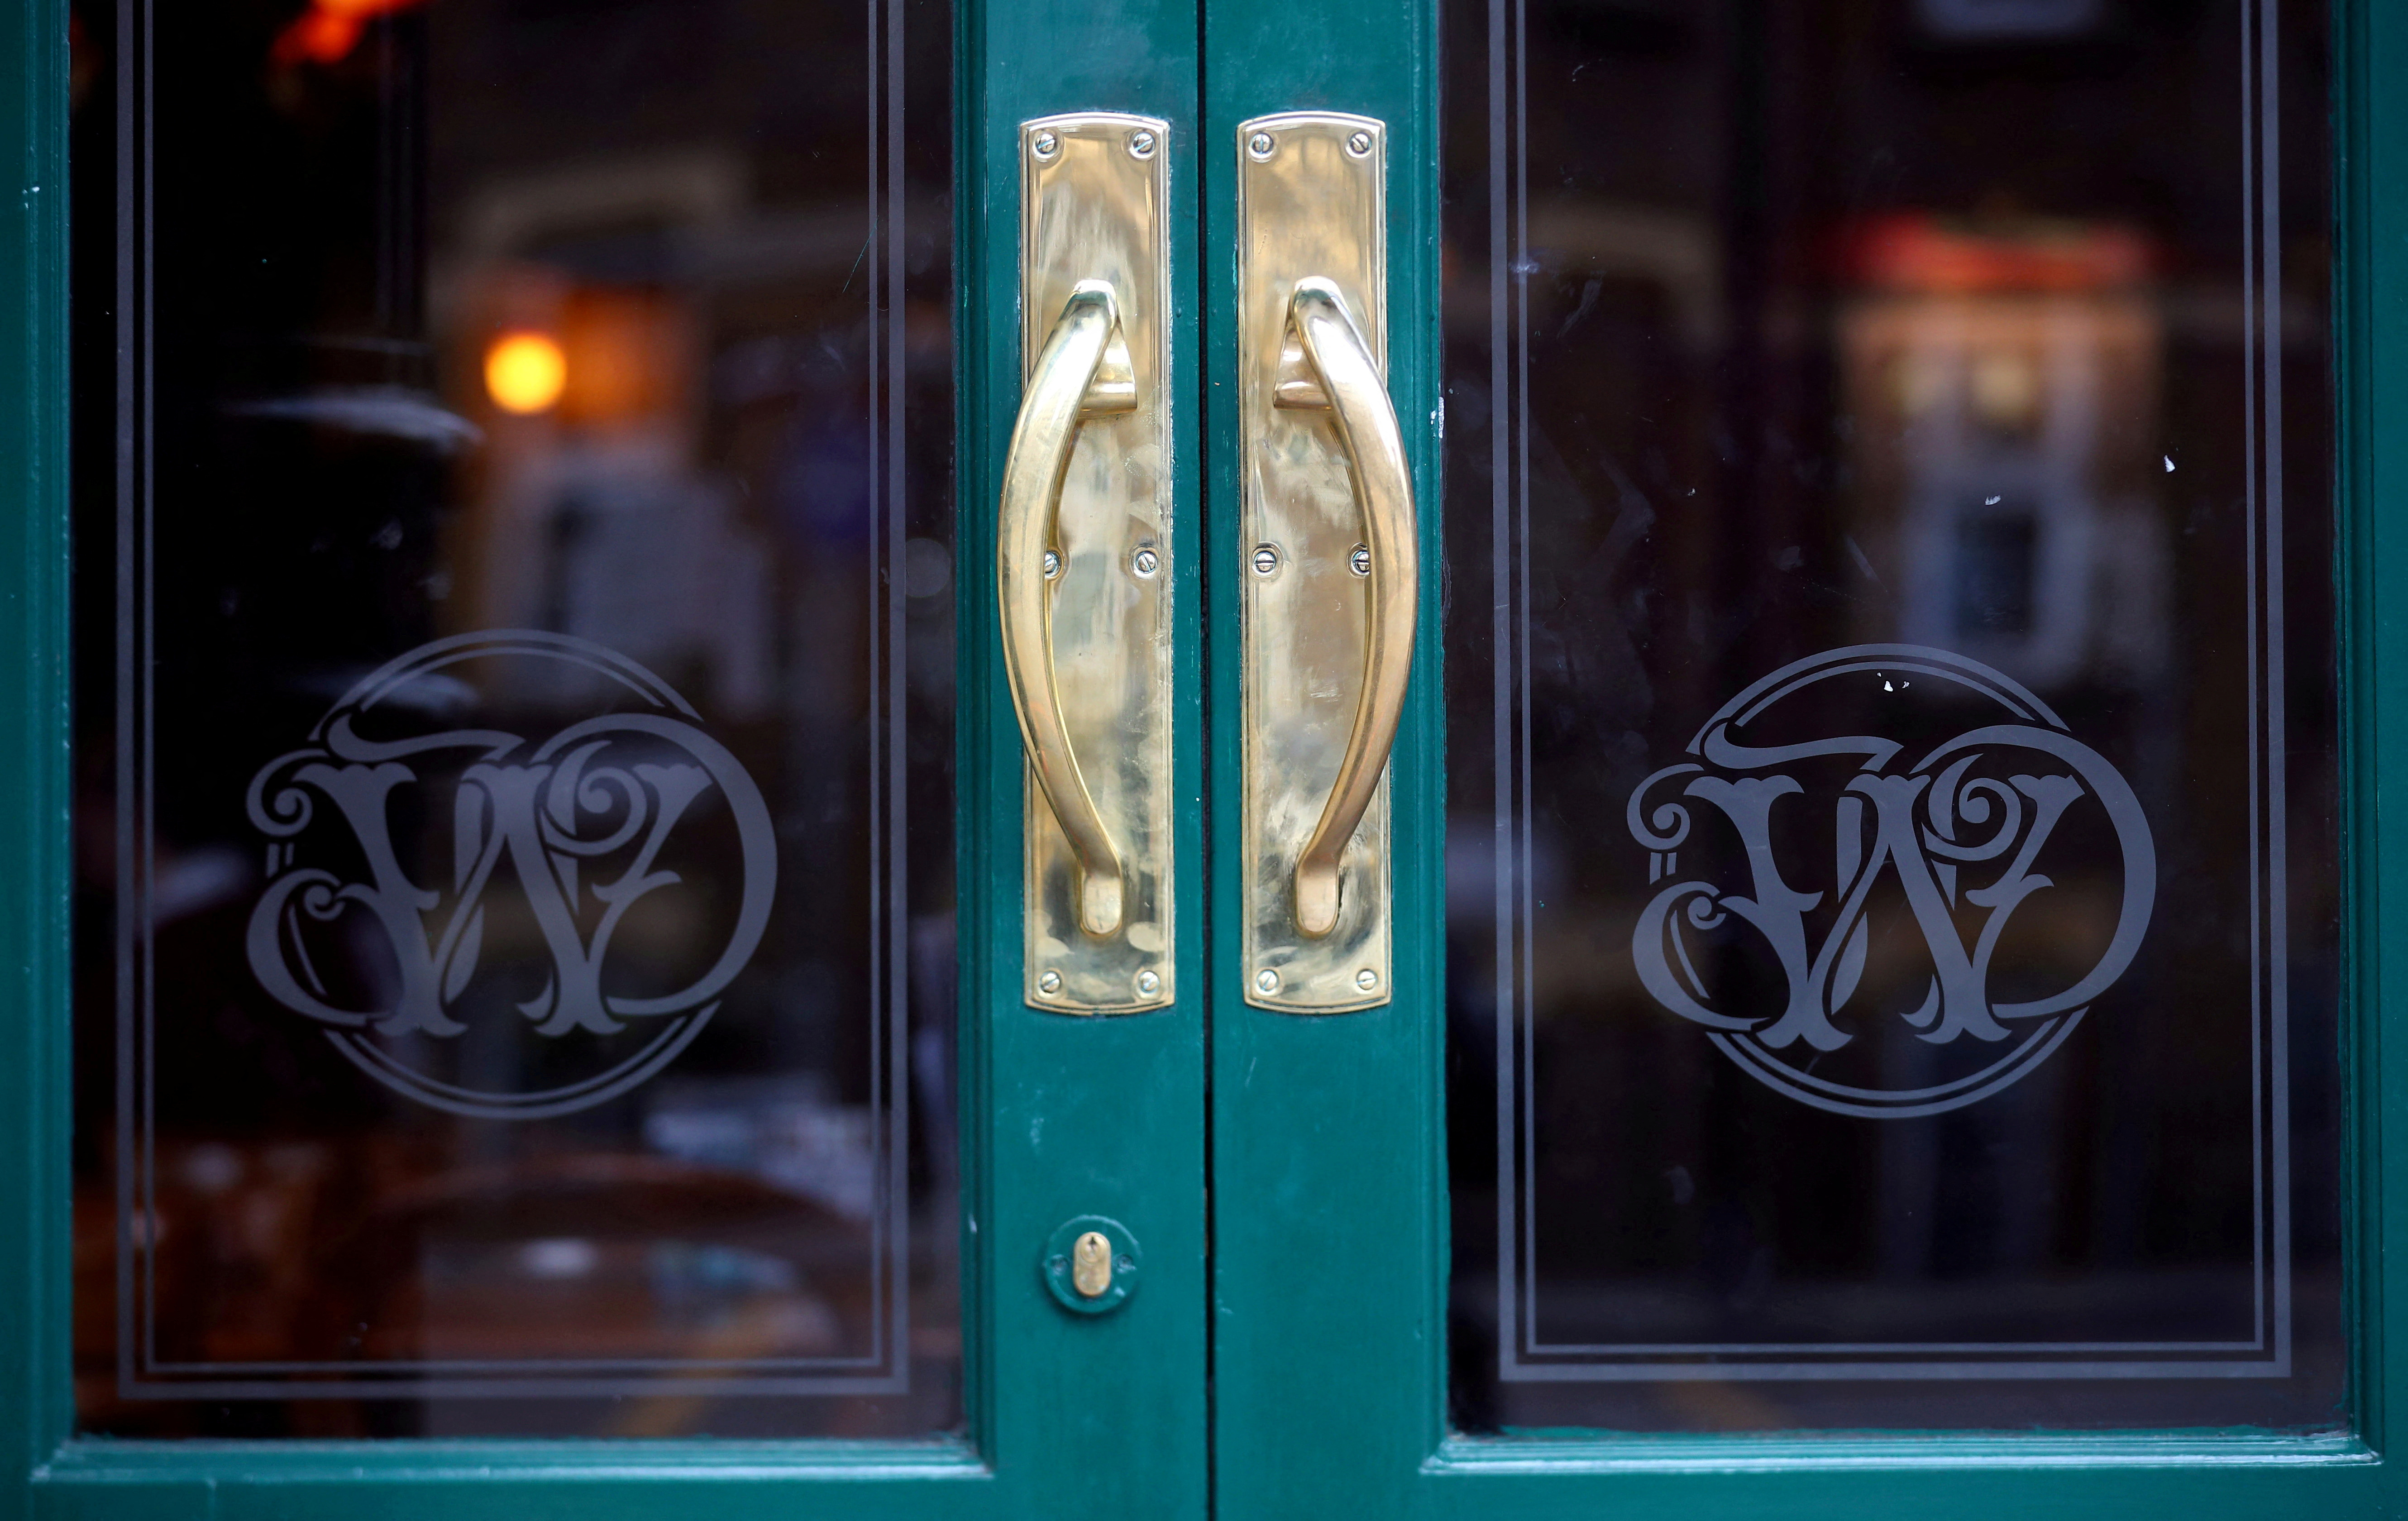 Wetherspoon's logos are seen at the entrance to a pub in central London